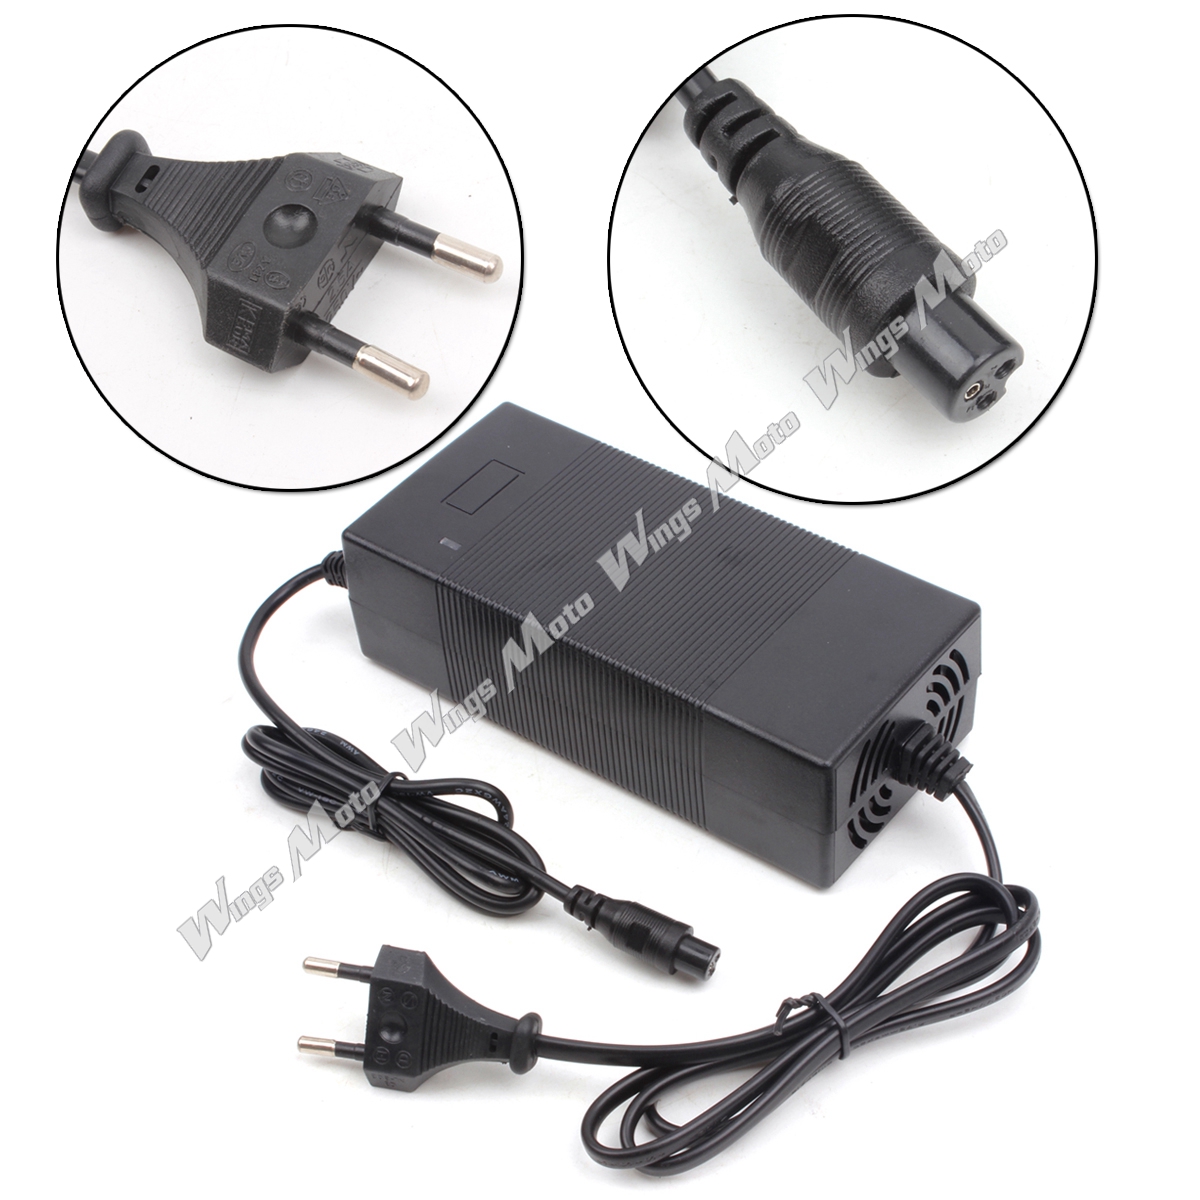 36V 42V Power Adapter 3-Prong Inline Connector for Pocket Mod, Sports Mod and Dirt Quad Lithium Battery Charger EU Plug